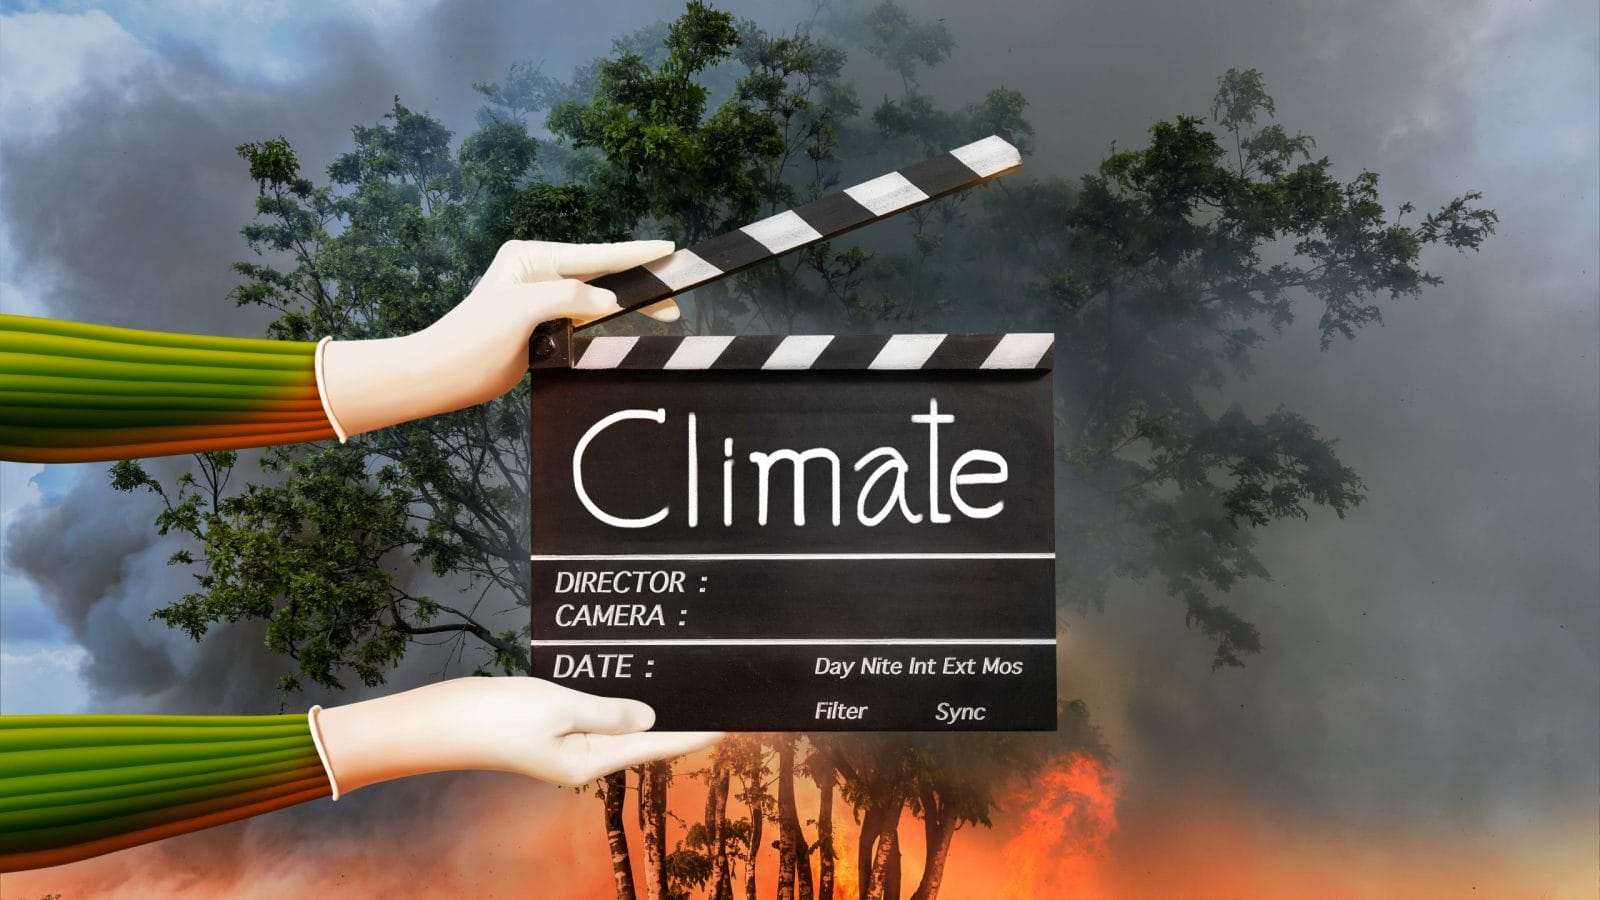 Hands holding film slate or movie clapper board on fire forest